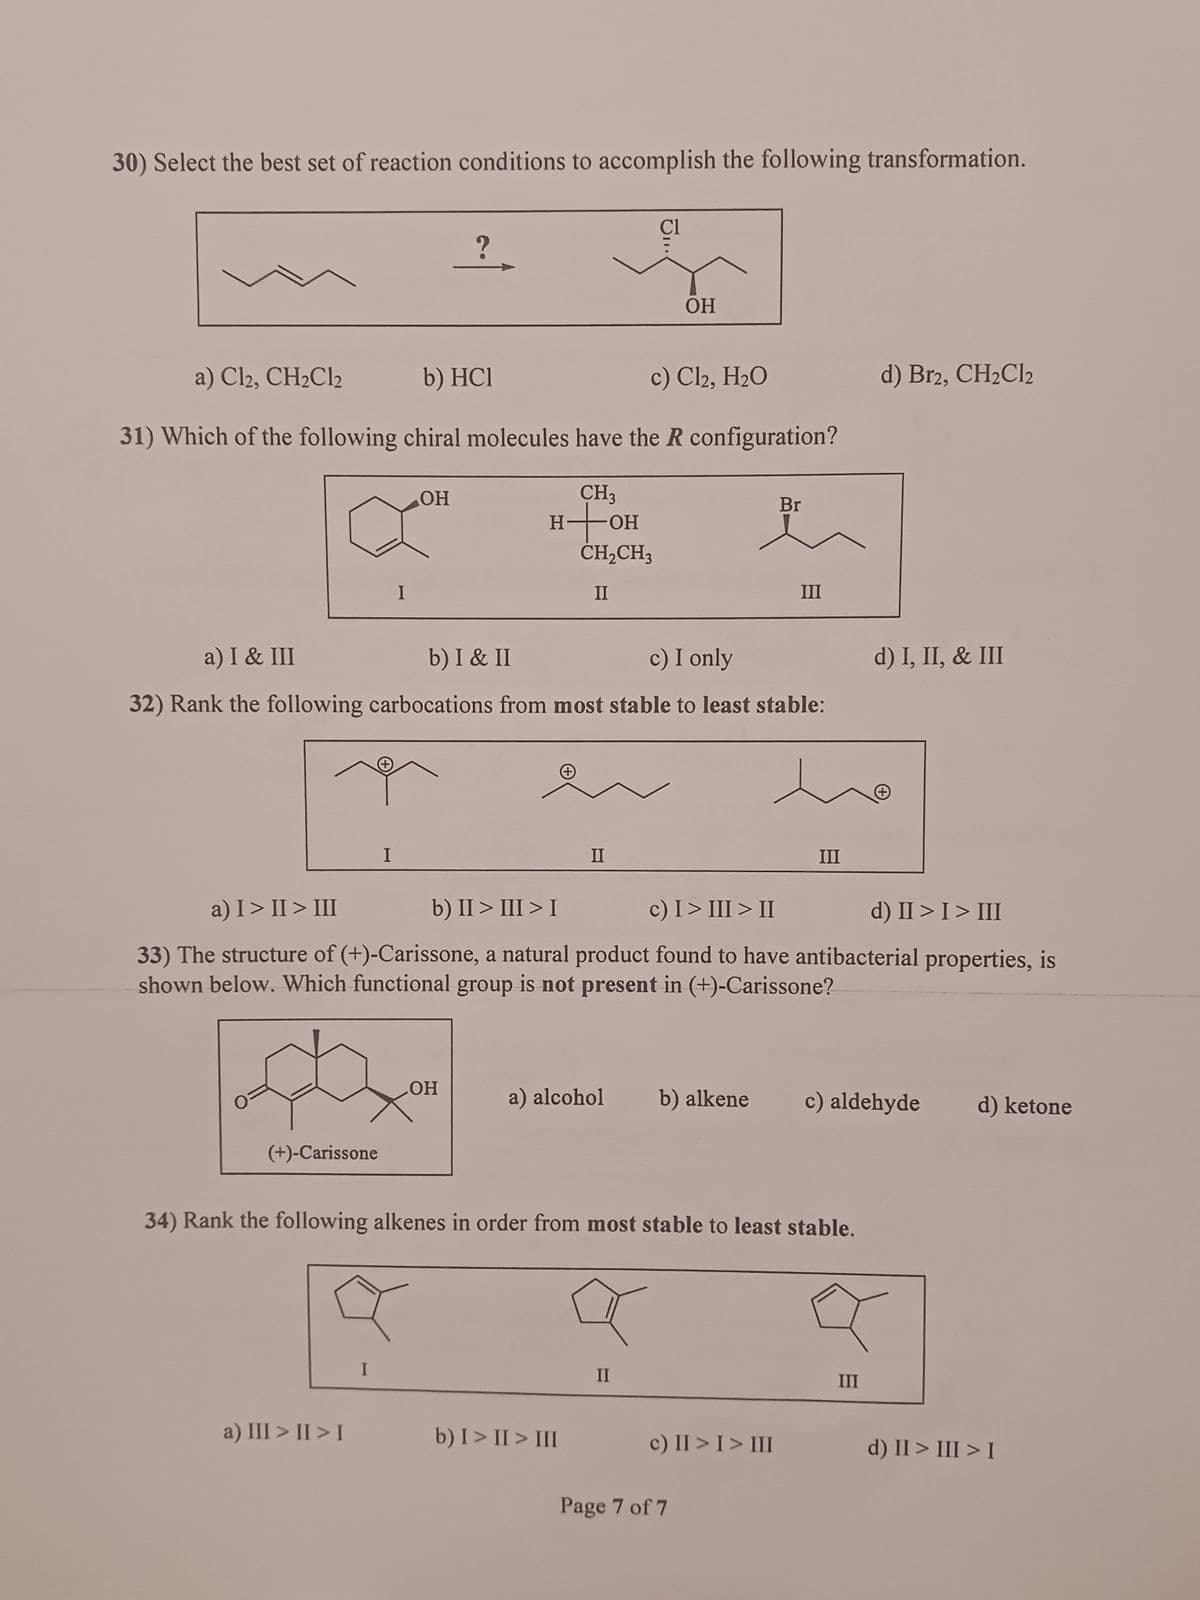 30) Select the best set of reaction conditions to accomplish the following transformation.
O
a) Cl2, CH₂Cl2
b) HC1
c) Cl₂, H₂O
31) Which of the following chiral molecules have the R configuration?
CH3
to OH
(+)-Carissone
I
1
a) III >II>I
OH
I
?
H
OH
a) I & III
b) I & II
c) I only
32) Rank the following carbocations from most stable to least stable:
CH₂CH3
II
JI..
II
CI
b) I > II > III
OH
a) I > II > III
b) II > III > I
c) I > III > II
d) II > I > III
33) The structure of (+)-Carissone, a natural product found to have antibacterial properties, is
shown below. Which functional group is not present in (+)-Carissone?
a) alcohol b) alkene
II
Br
34) Rank the following alkenes in order from most stable to least stable.
III
c) II > I > III
Page 7 of 7
III
d) Br2, CH₂Cl2
d) I, II, & III
c) aldehyde d) ketone
III
d) II > III > I